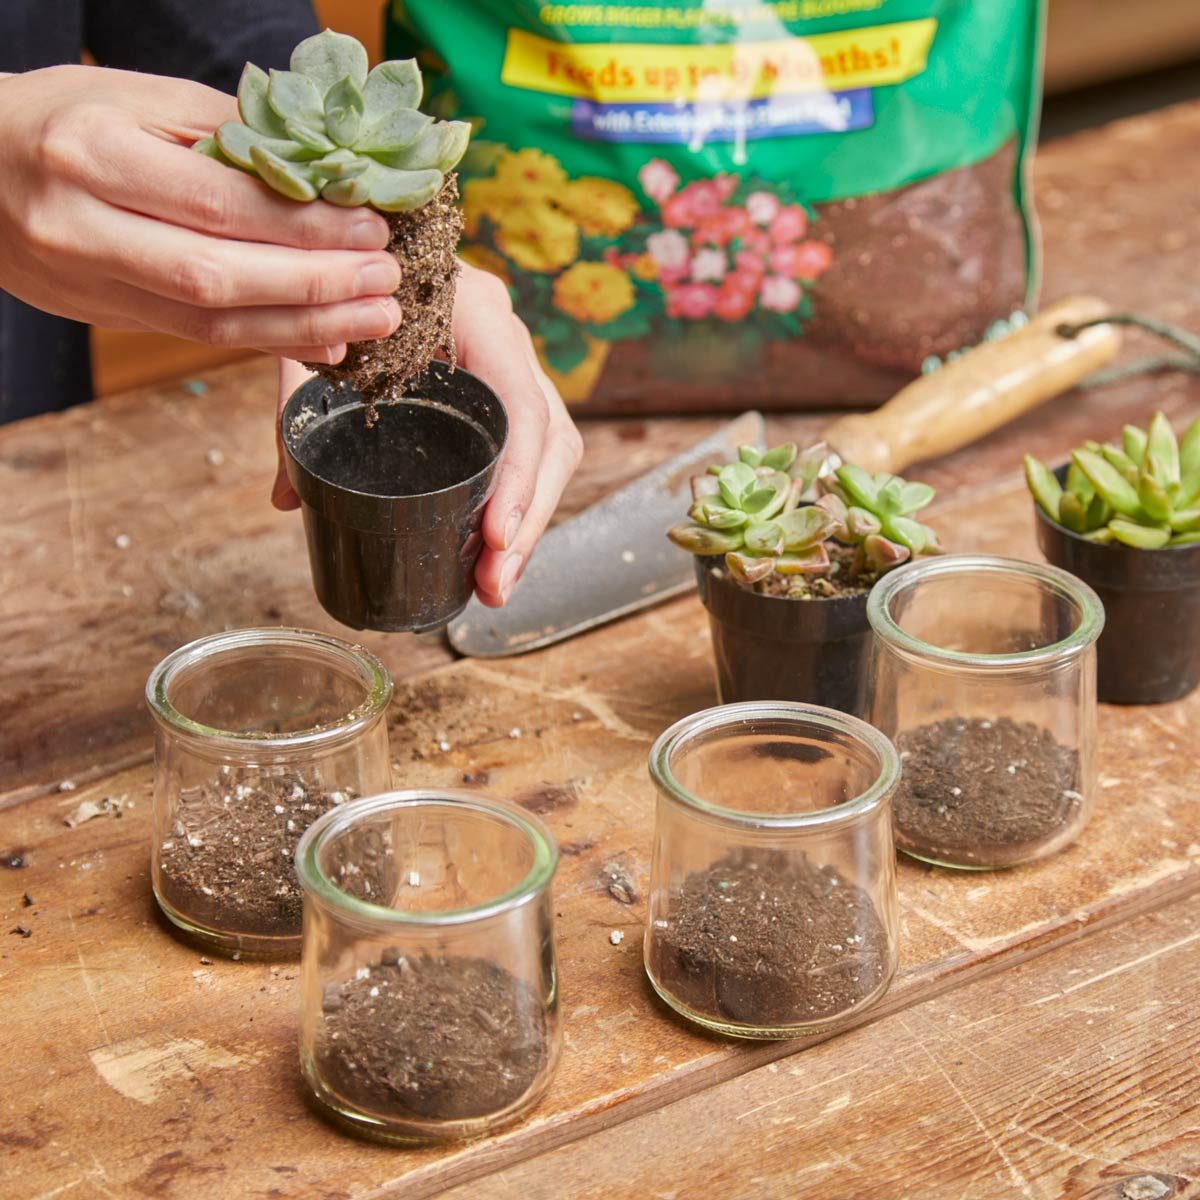 Planting Succulents In Recycled Glass Jars Diy The Family Handyman,Silver Quarters